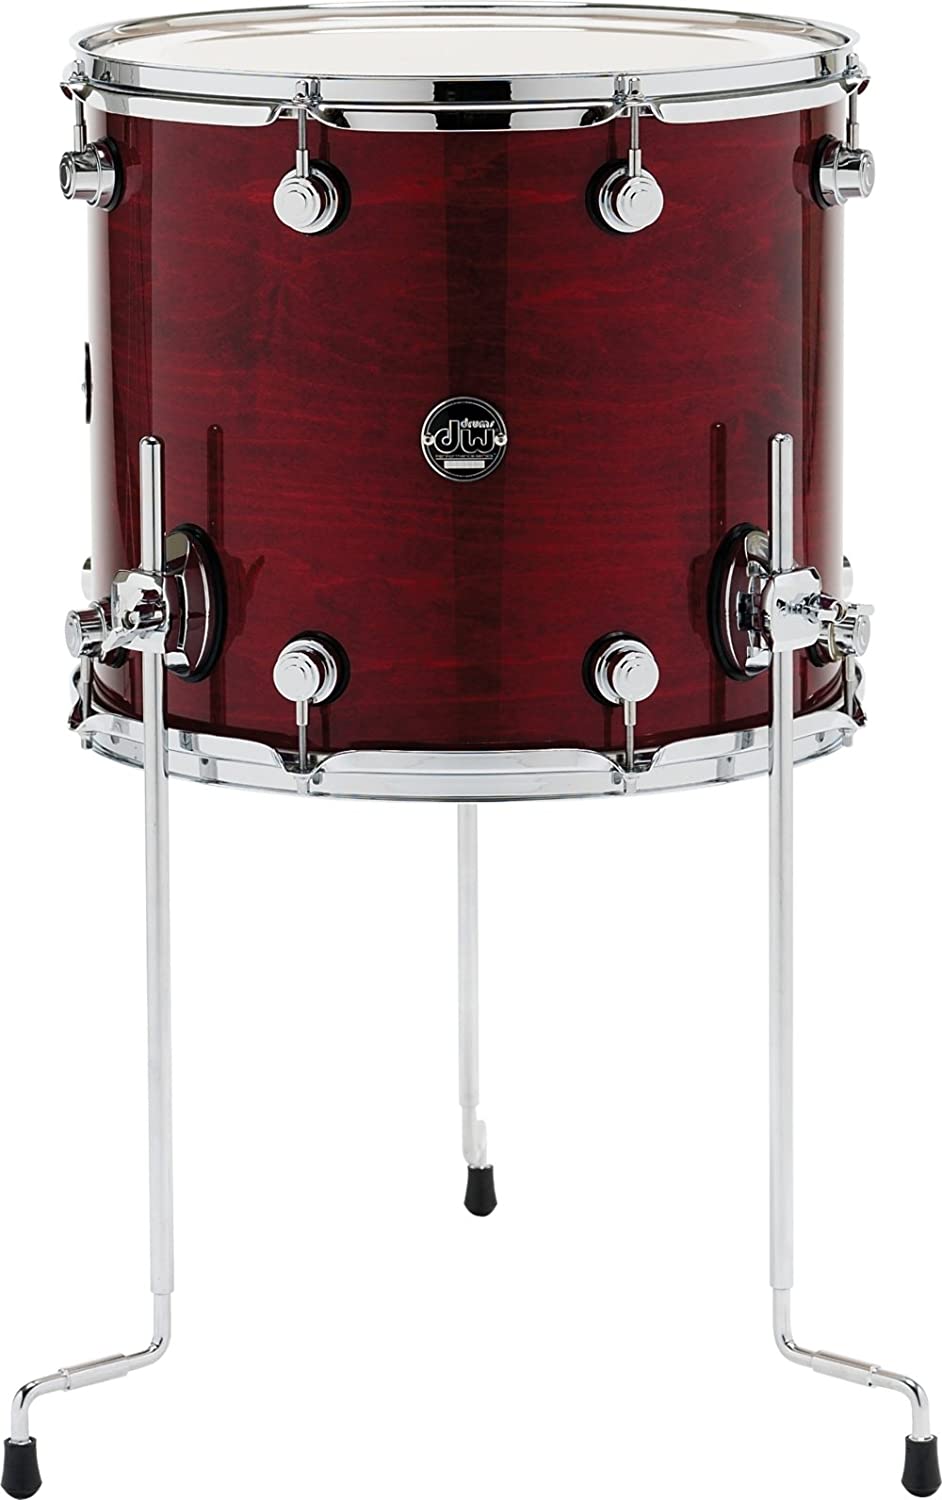 DW Performance Series Floor Tom - 14 x 16 inch - Cherry Stain Lacquer